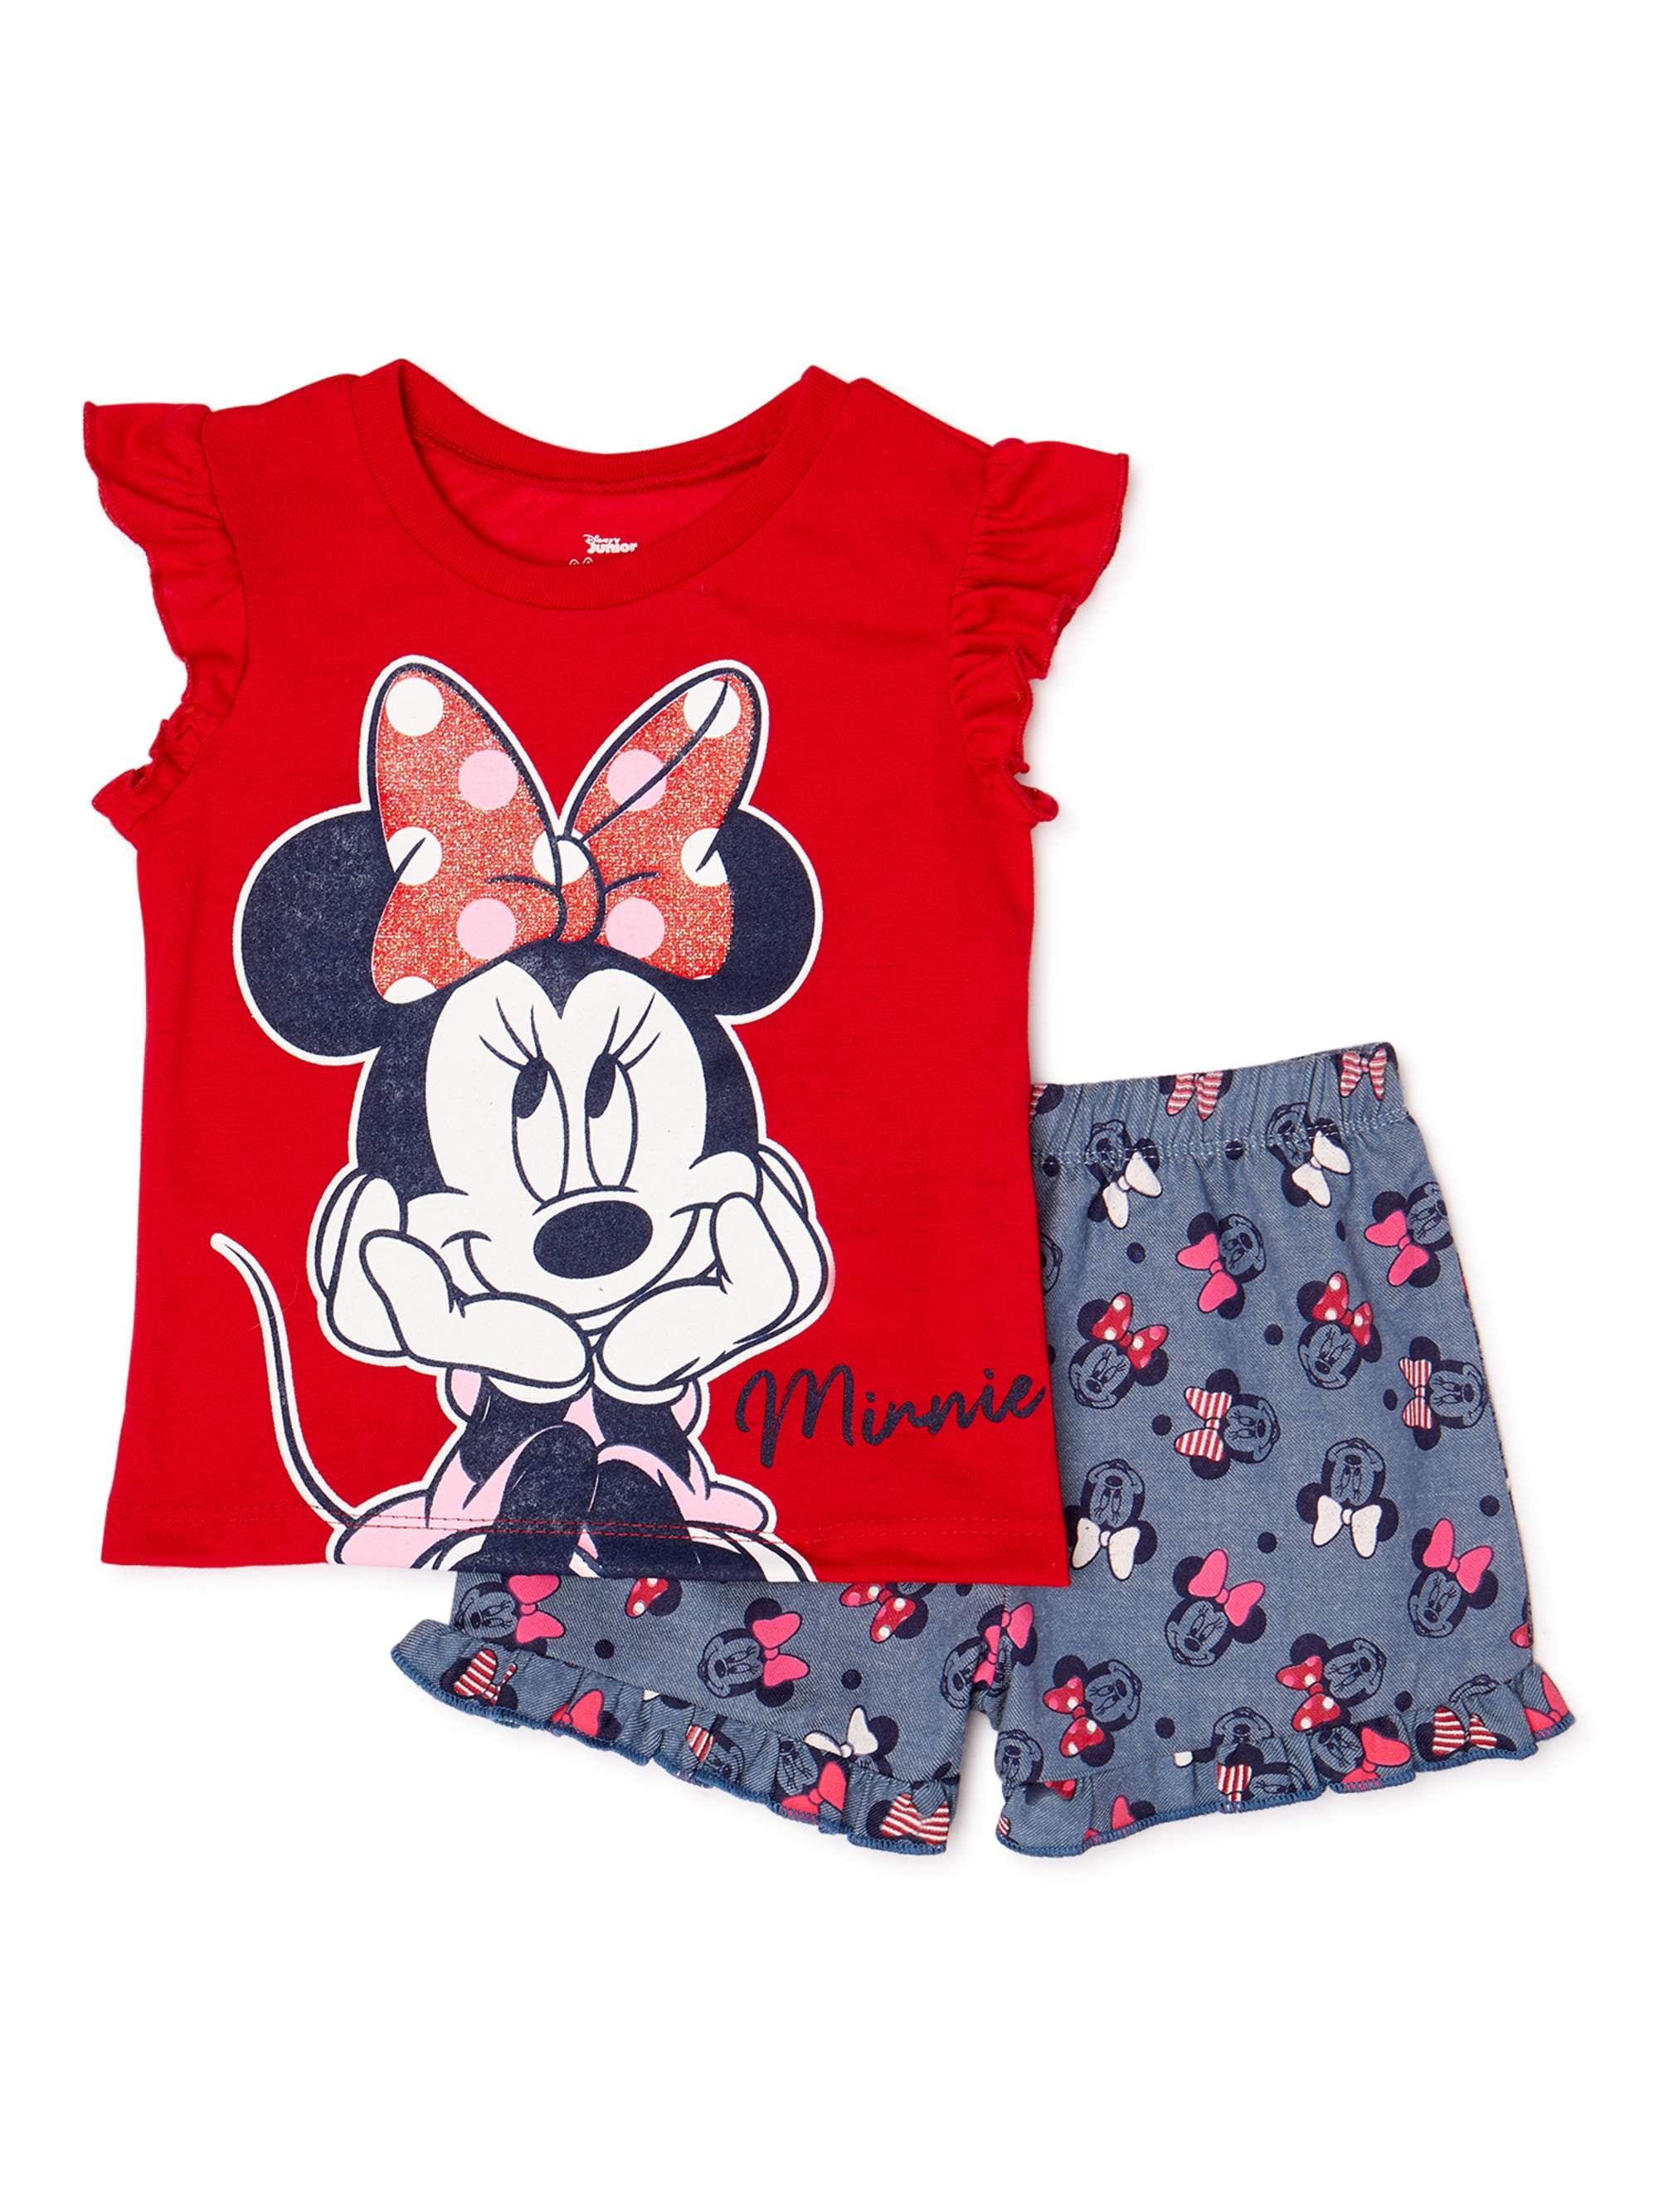 2PCS Baby Kids Toddler Girls Minnie Mouse T-shirt Tops+Pants Outfits Clothes Set 